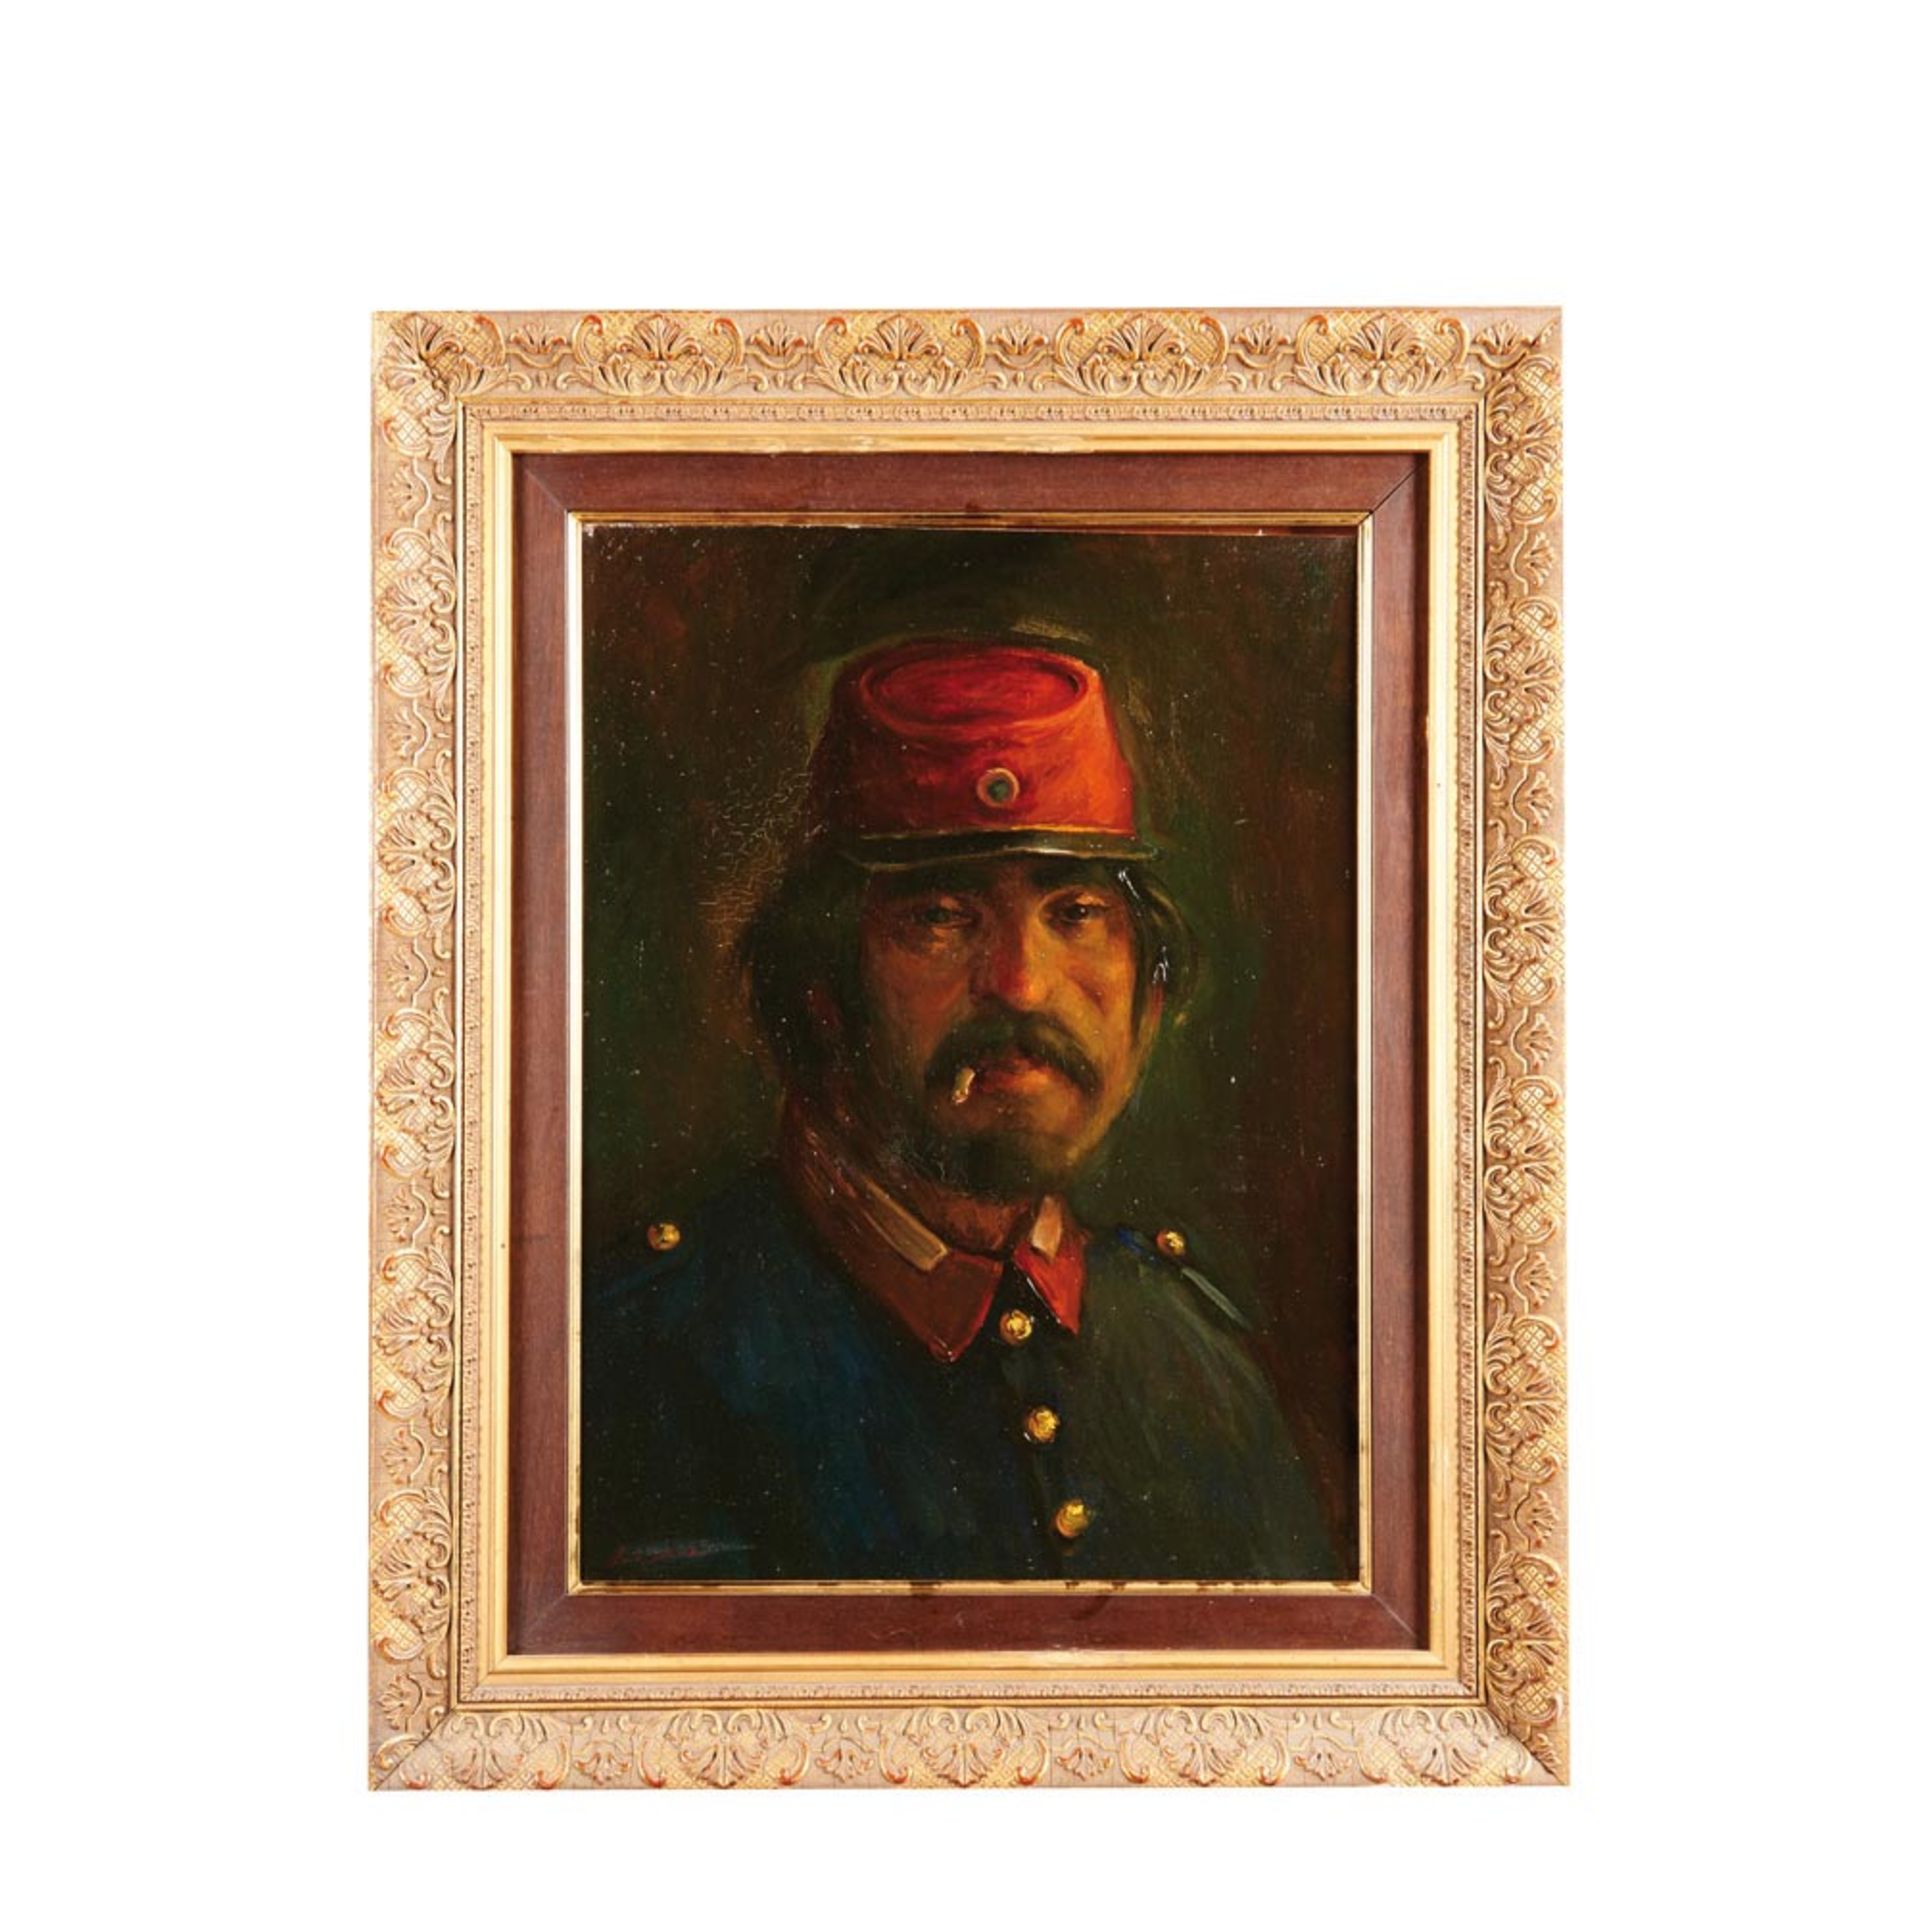 Soldier. Oil on panel